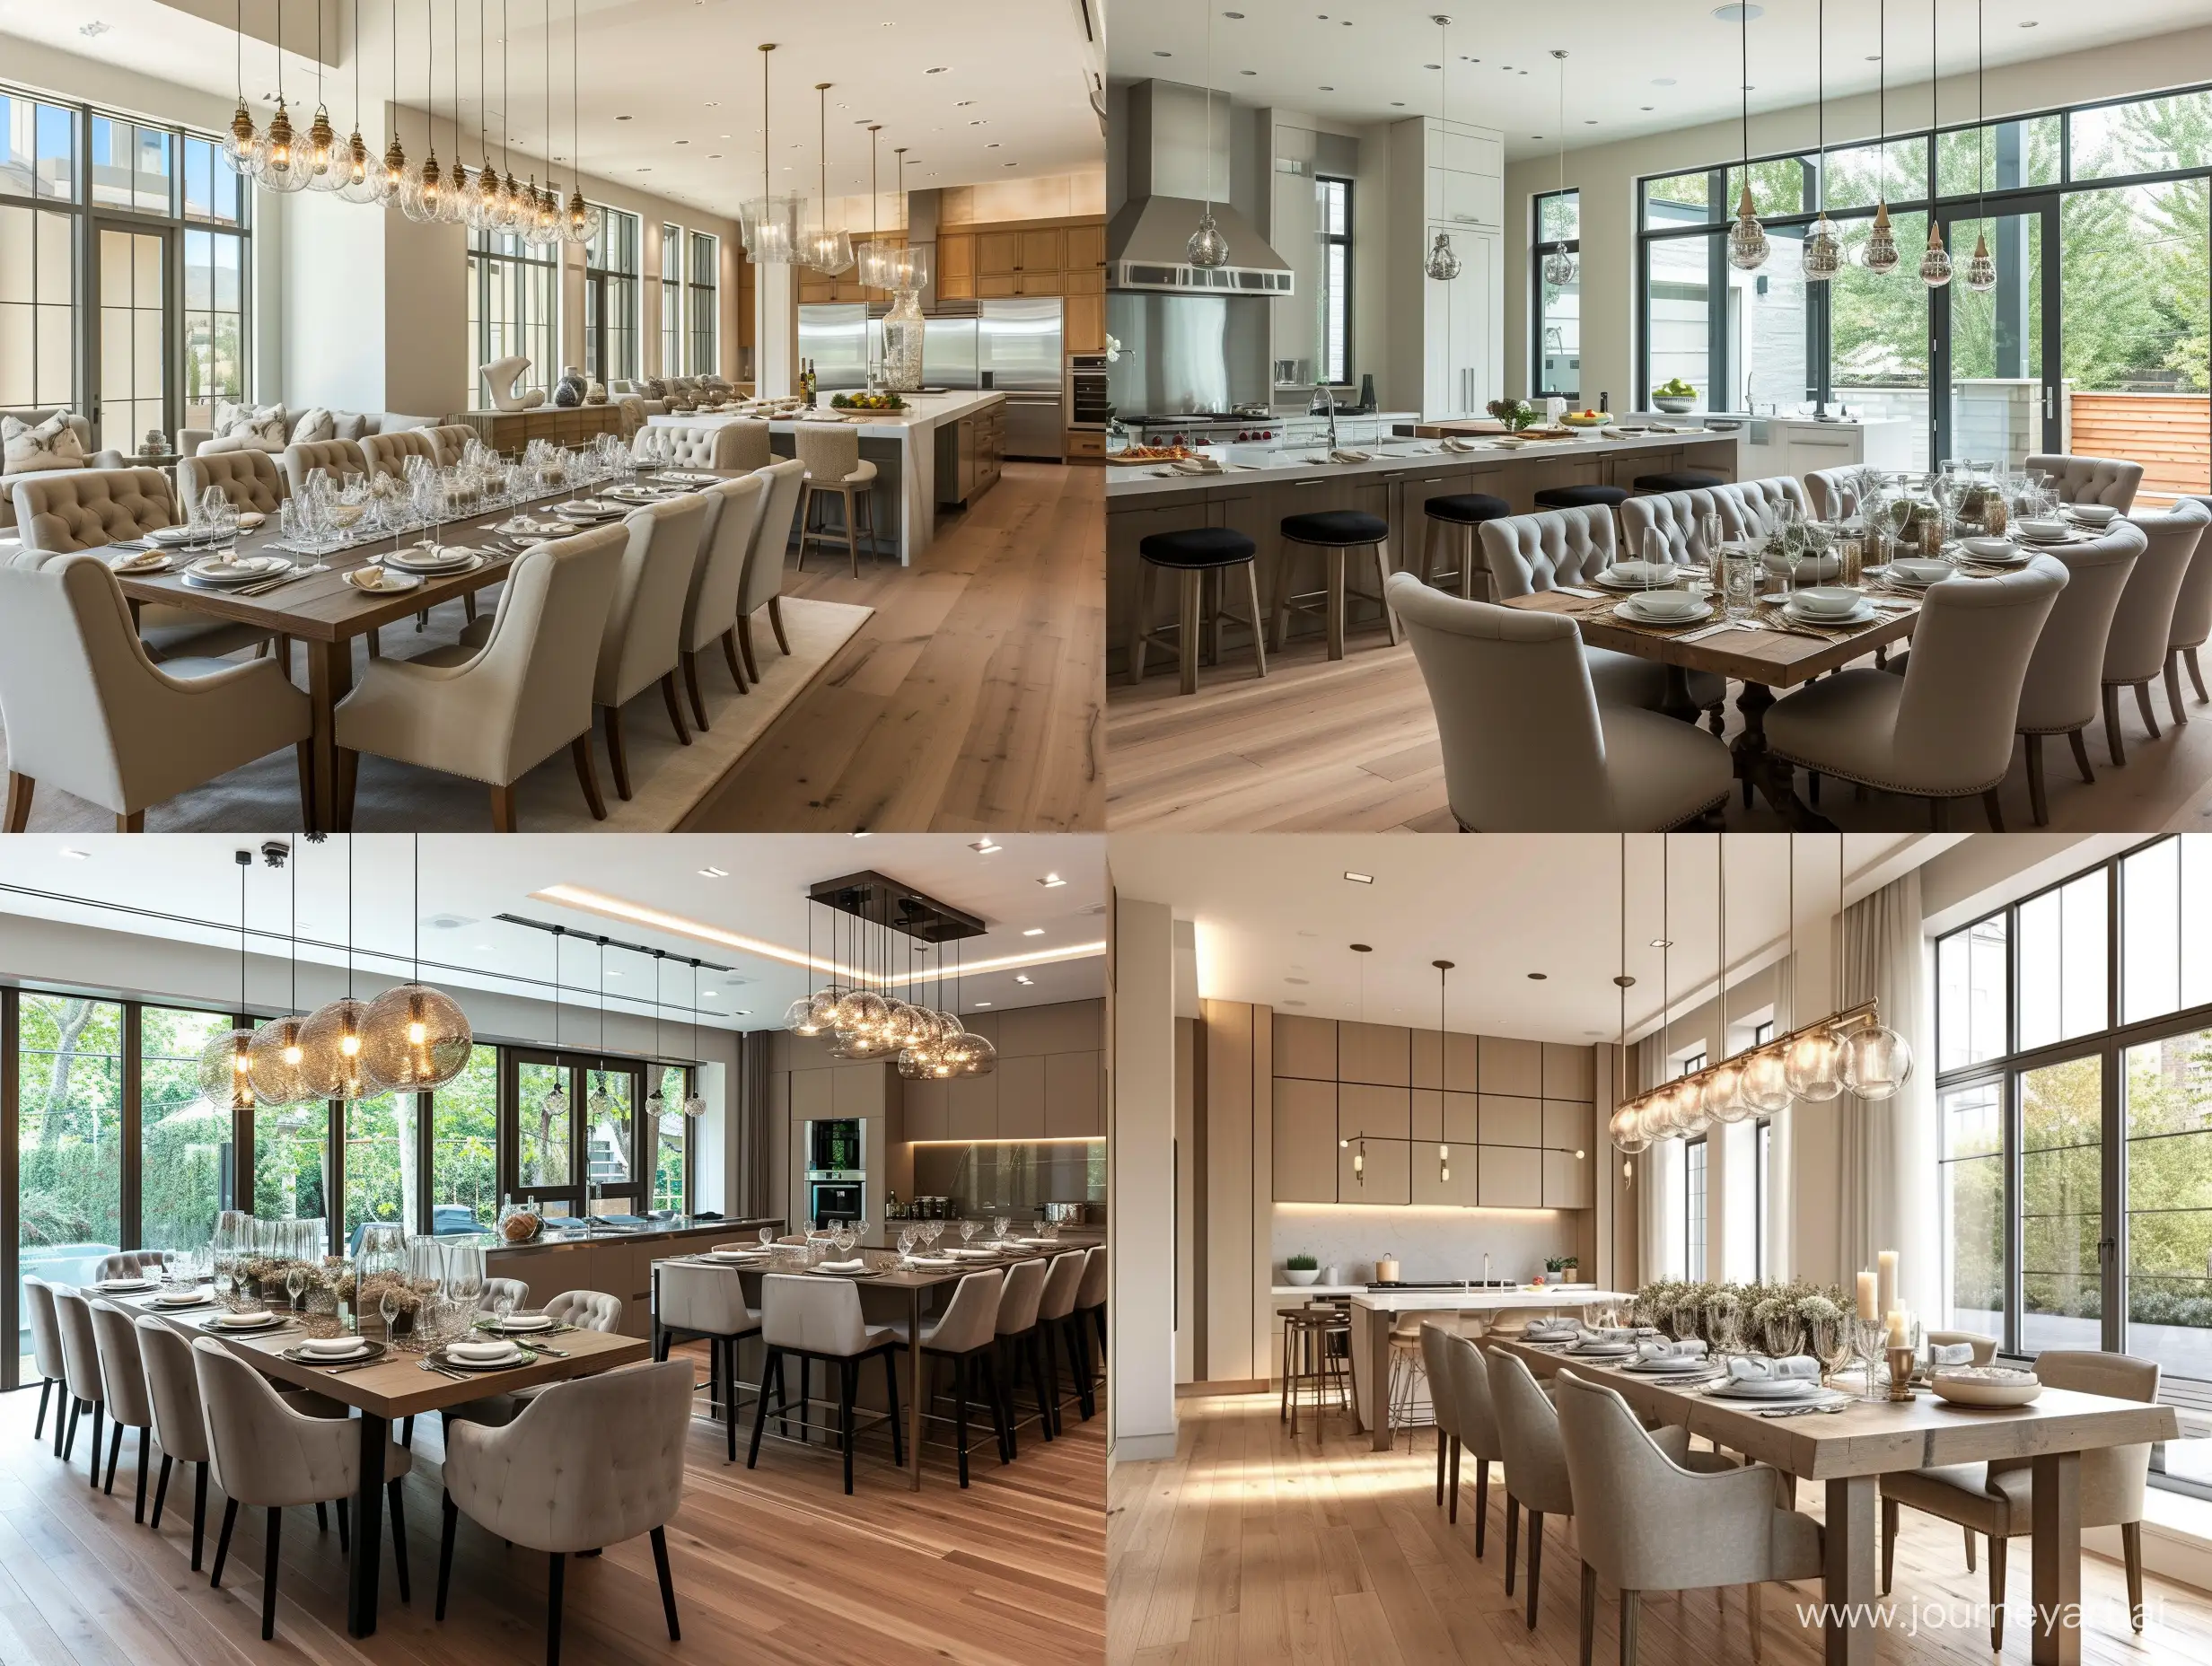 a spacious and modern dining and kitchen area. The dining area should have a long table set for dinner, surrounded by upholstered chairs. Above the table, there should be elegant pendant lights hanging. The kitchen should feature state-of-the-art appliances, with an island and bar stools. Large windows allow natural light to flood the room, highlighting the wooden floor and neutral color palette